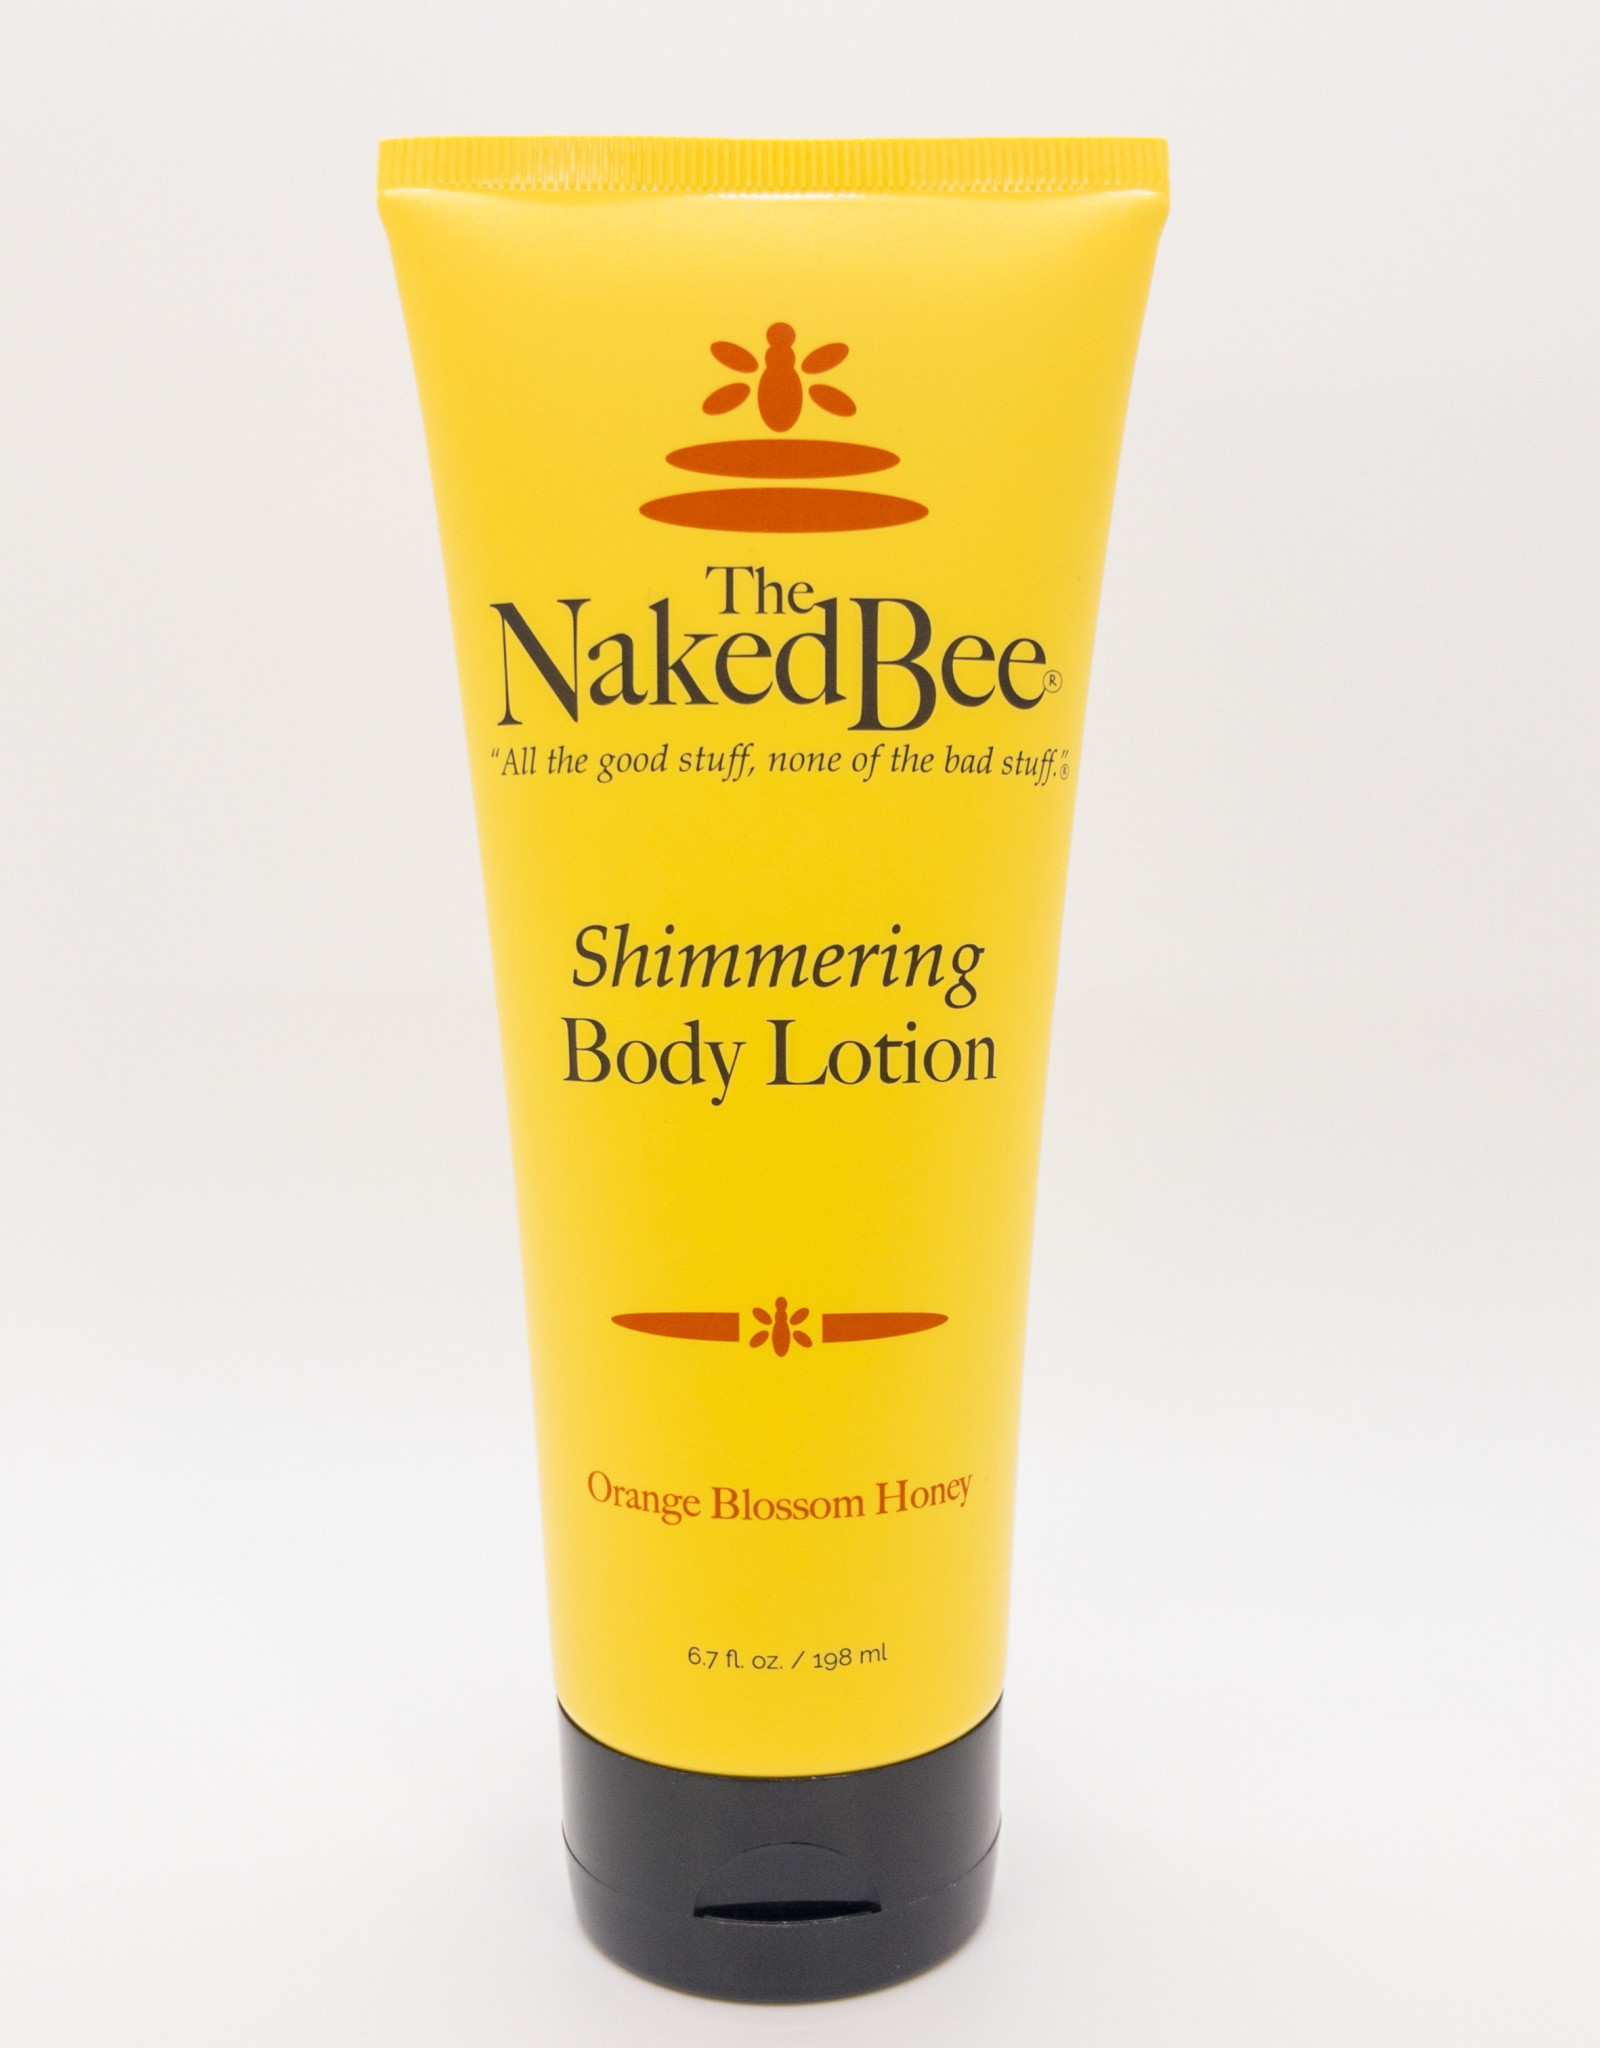 The Naked Bee The Naked Bee Shimmering Body Lotion 